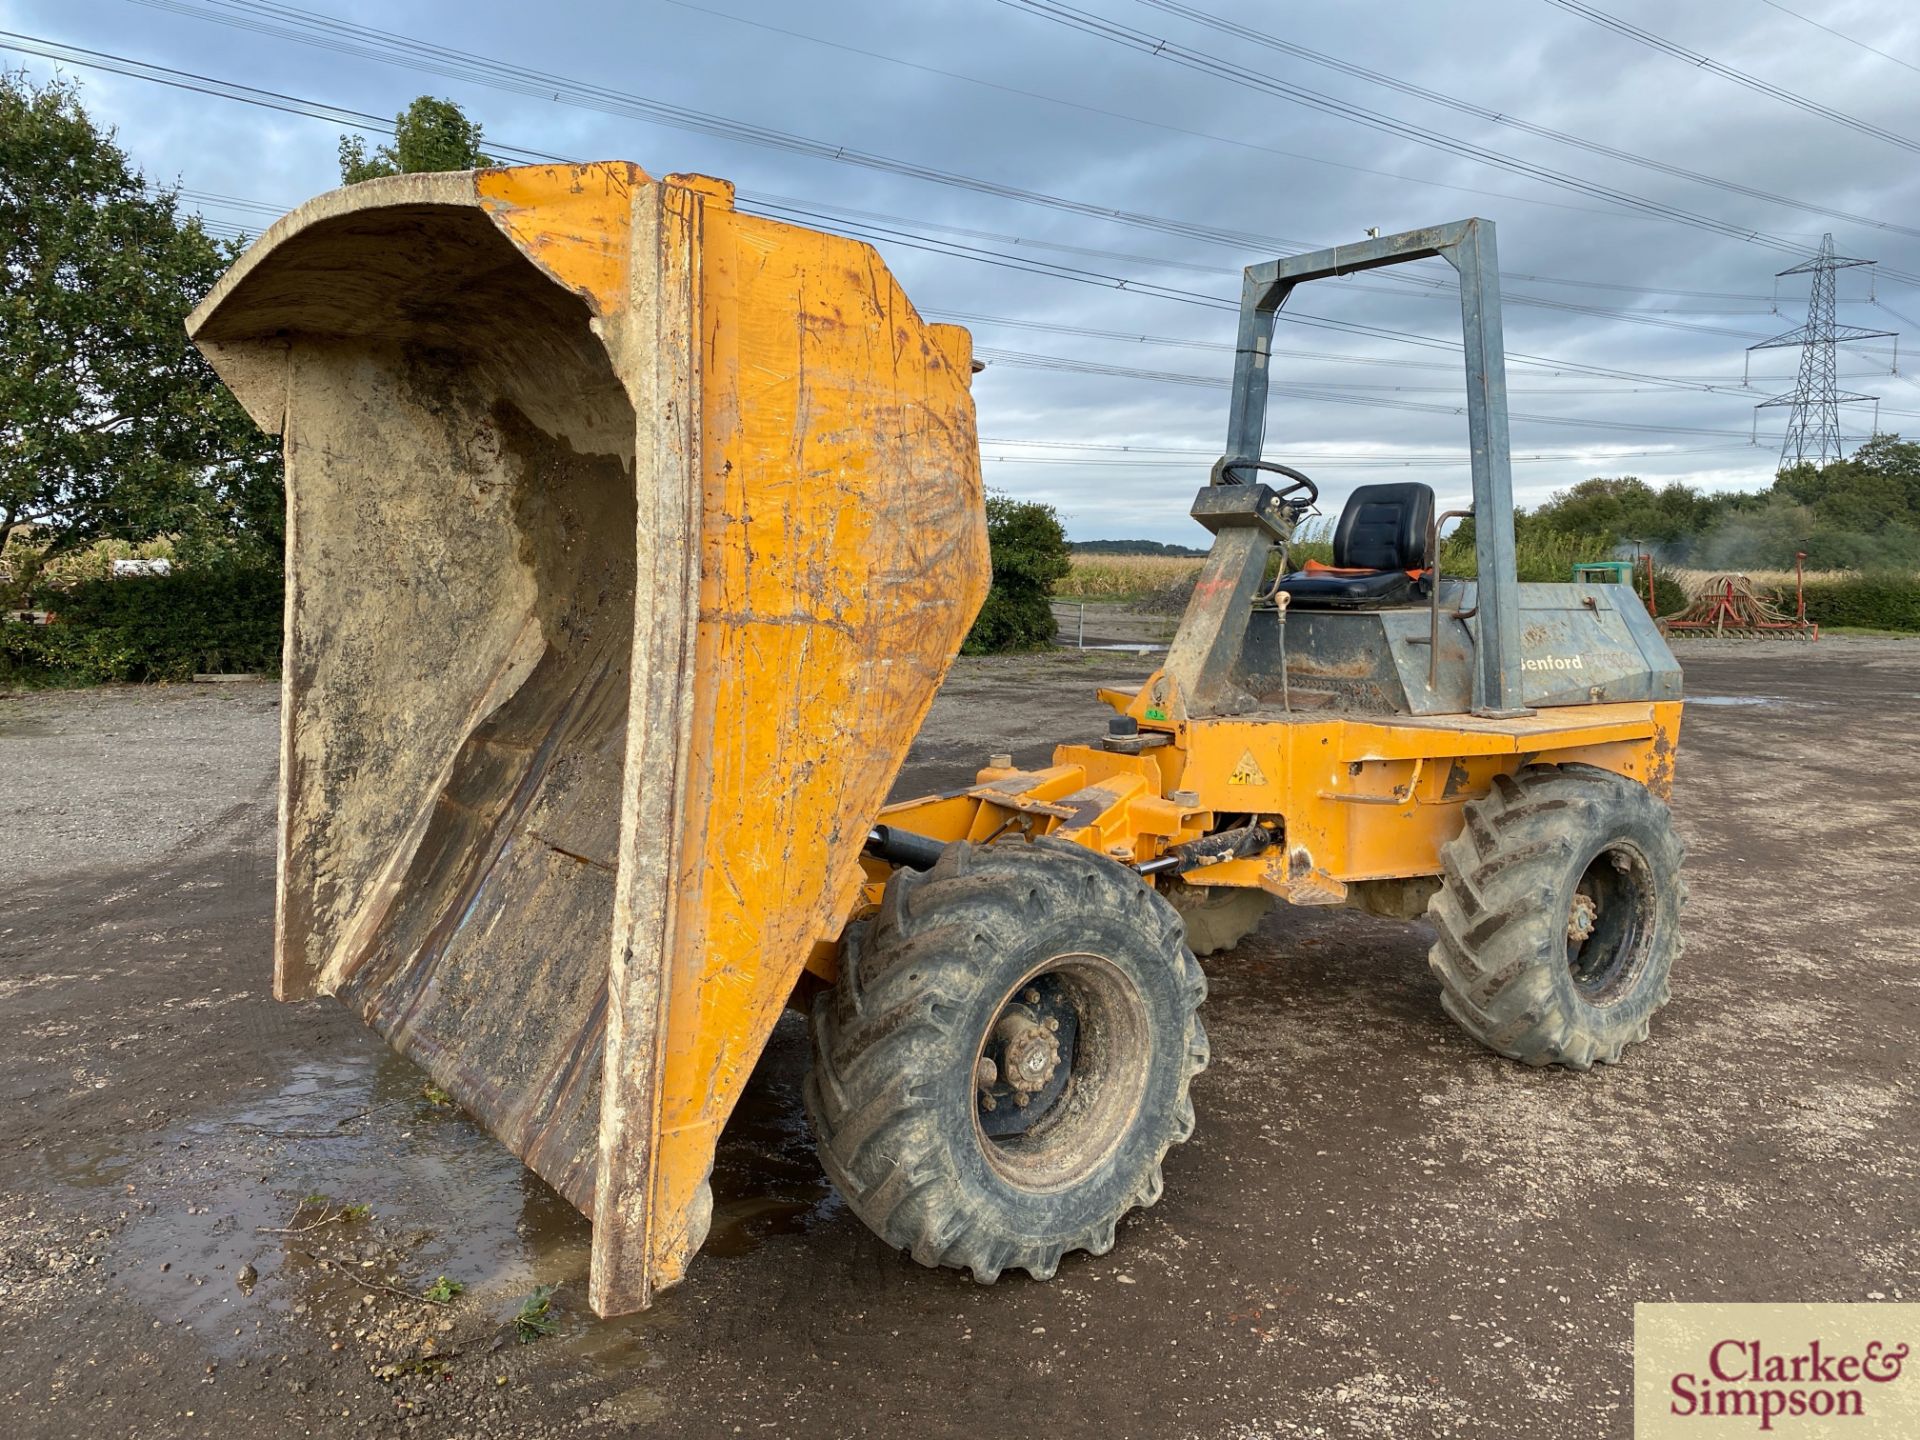 Benford 6T 4WD pivot steer dumper. 2000. Serial number SLBDNOOEY7H0721. 405/70R20 wheels and - Image 25 of 36